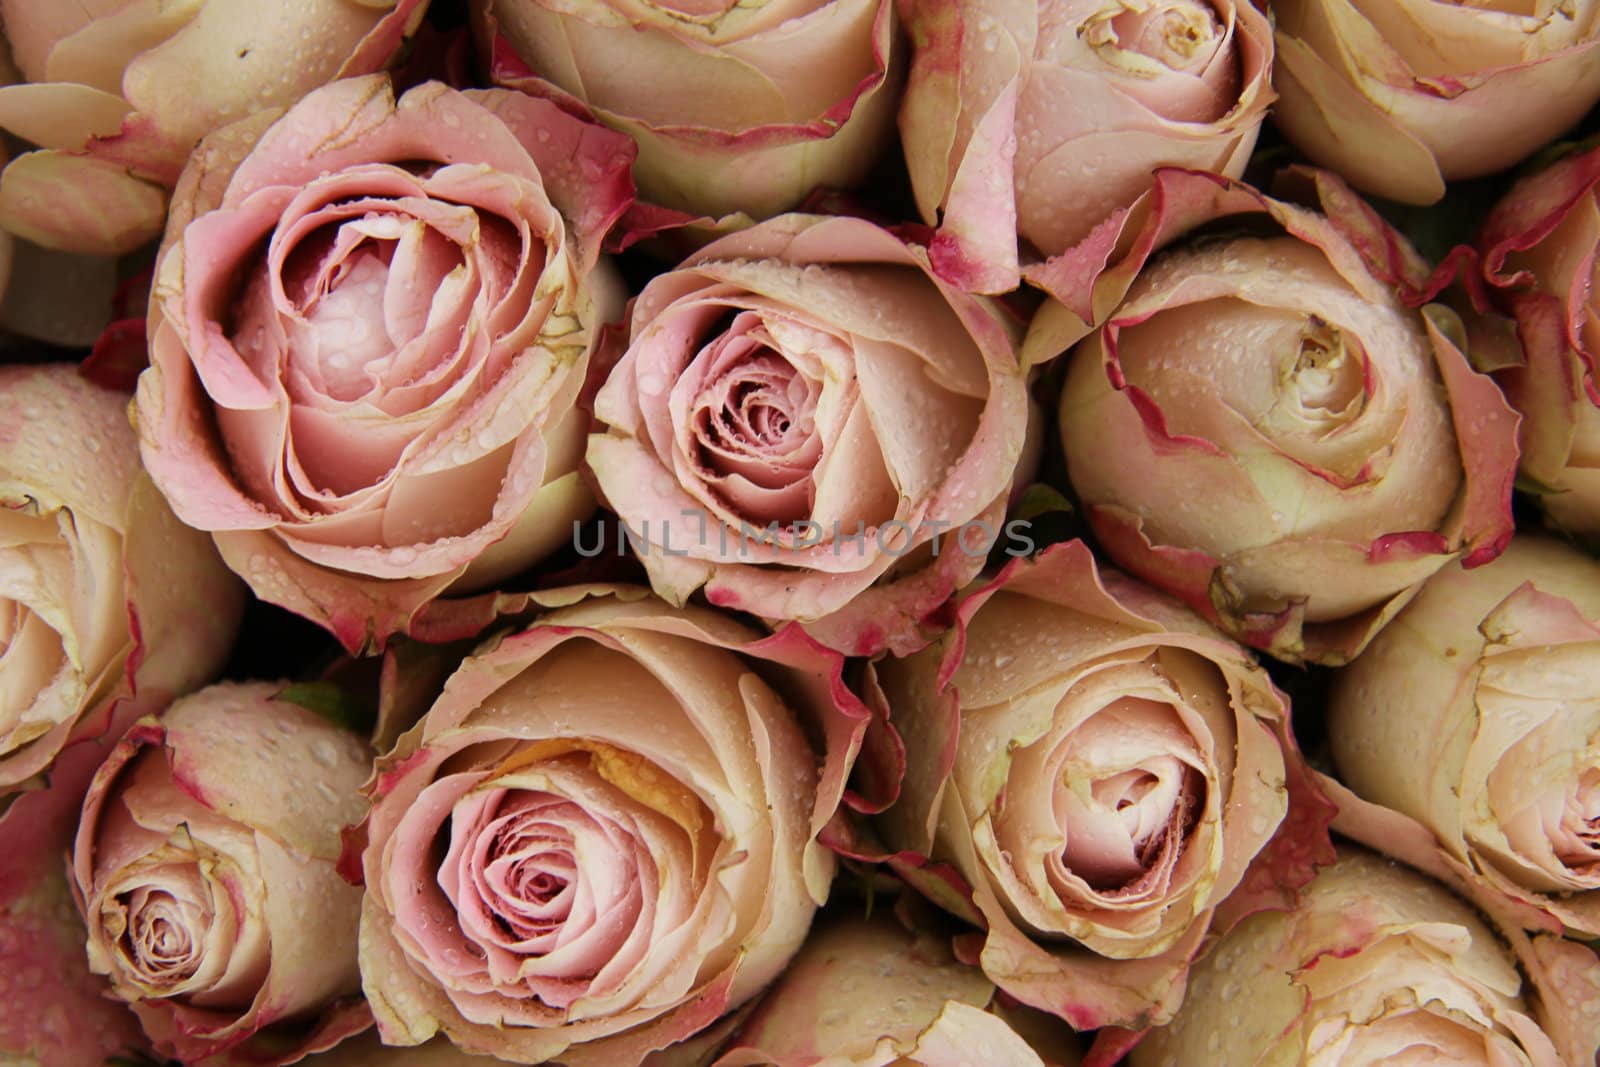 Group of pale pink roses with a touch of red, wedding decorations